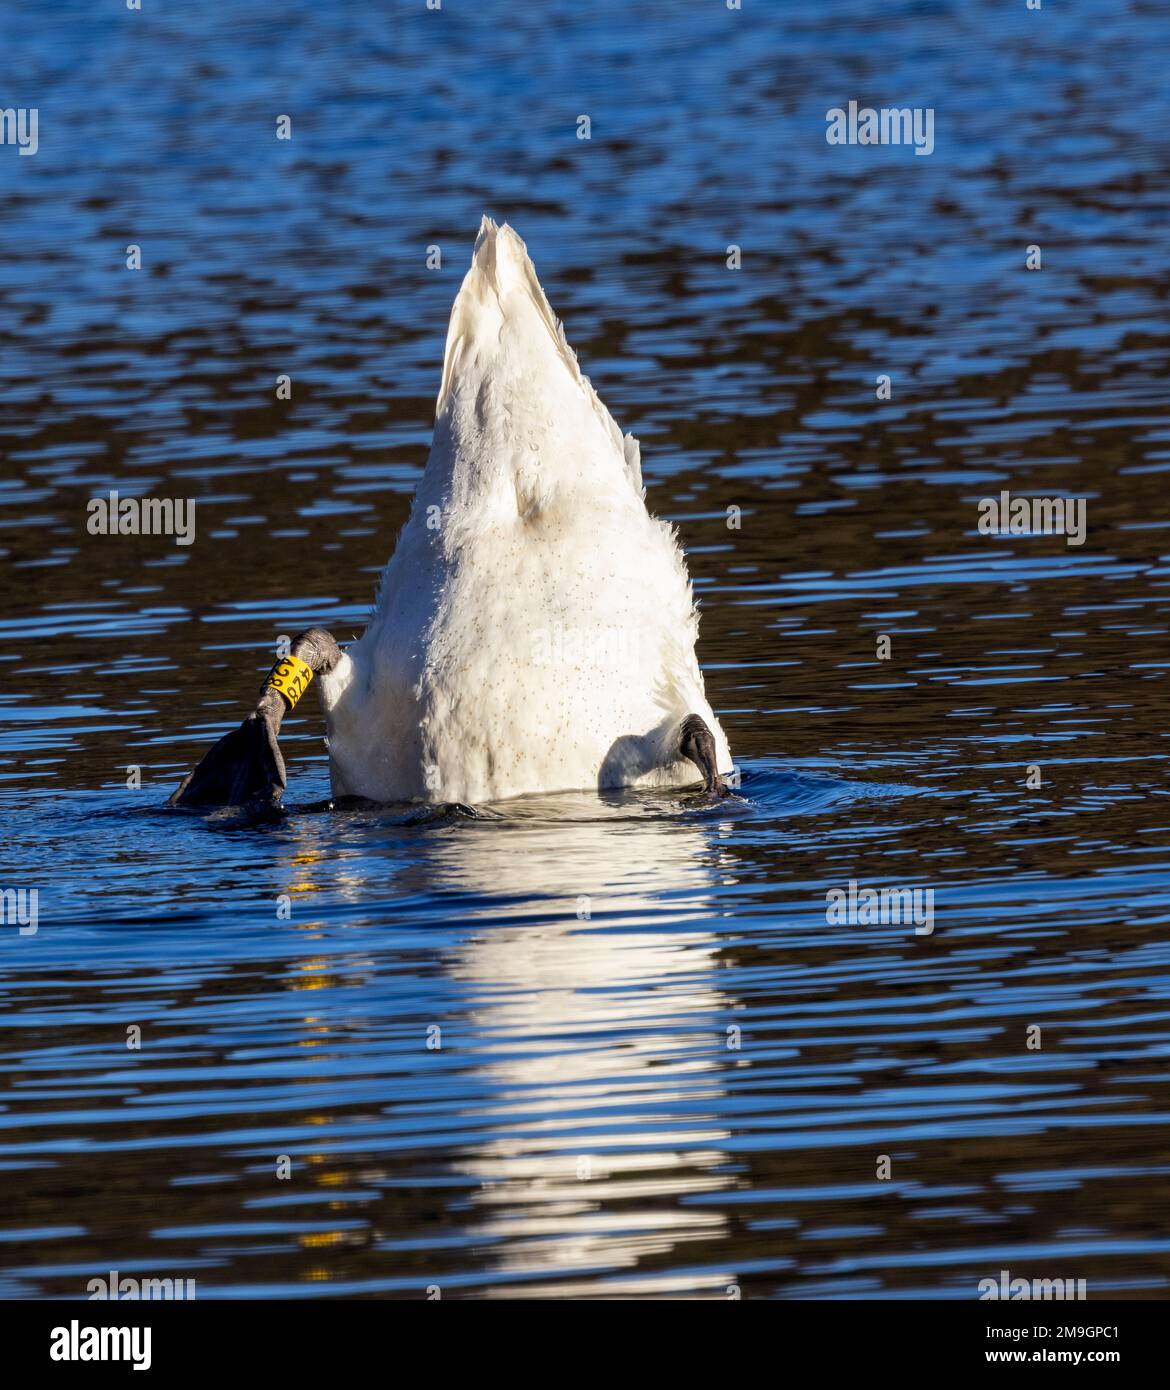 A Mute Swan feeds in open water in a technique known as up-ending. The Swans long neck allows it to reach submerged vegetation others cannot reach. Stock Photo